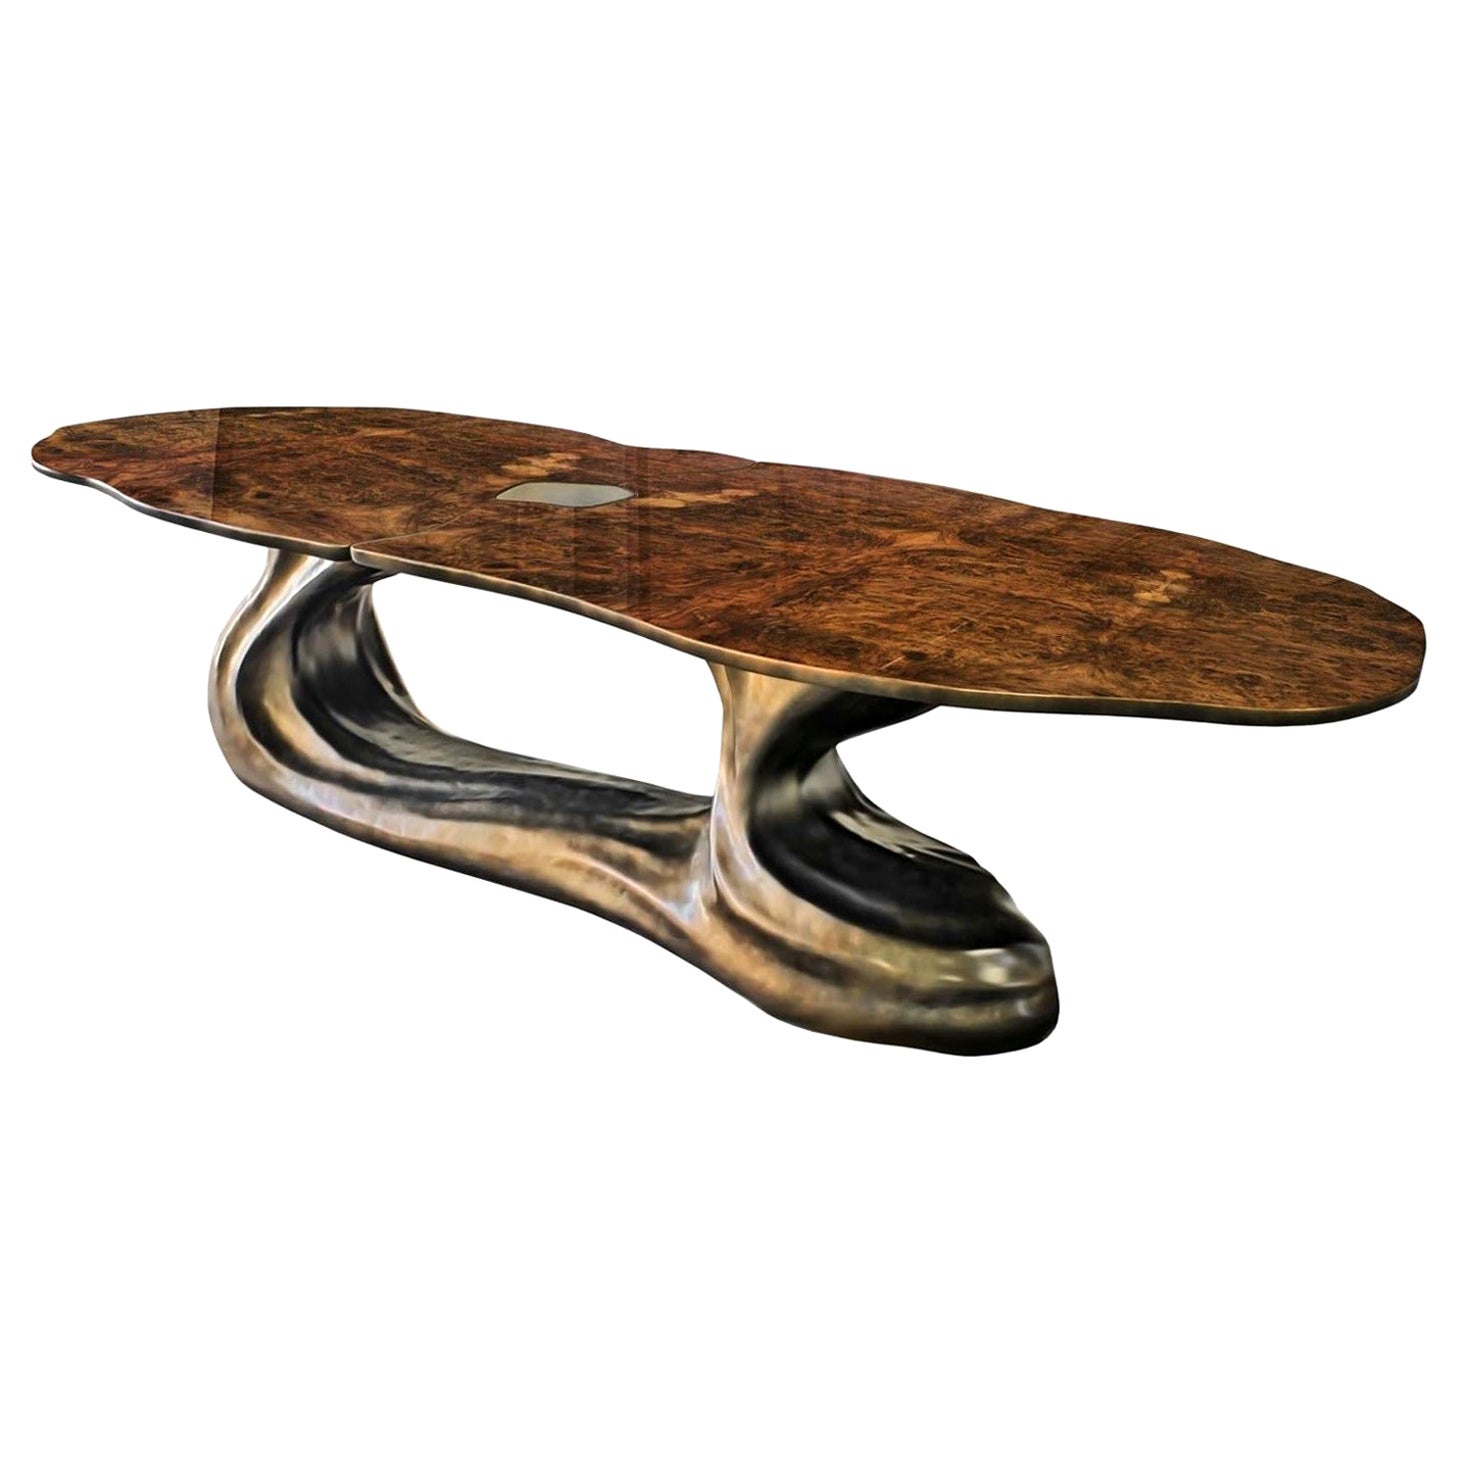 New Design Dining Table in Walnut Veneer for 10/12 Persons Ready Delivery Now For Sale